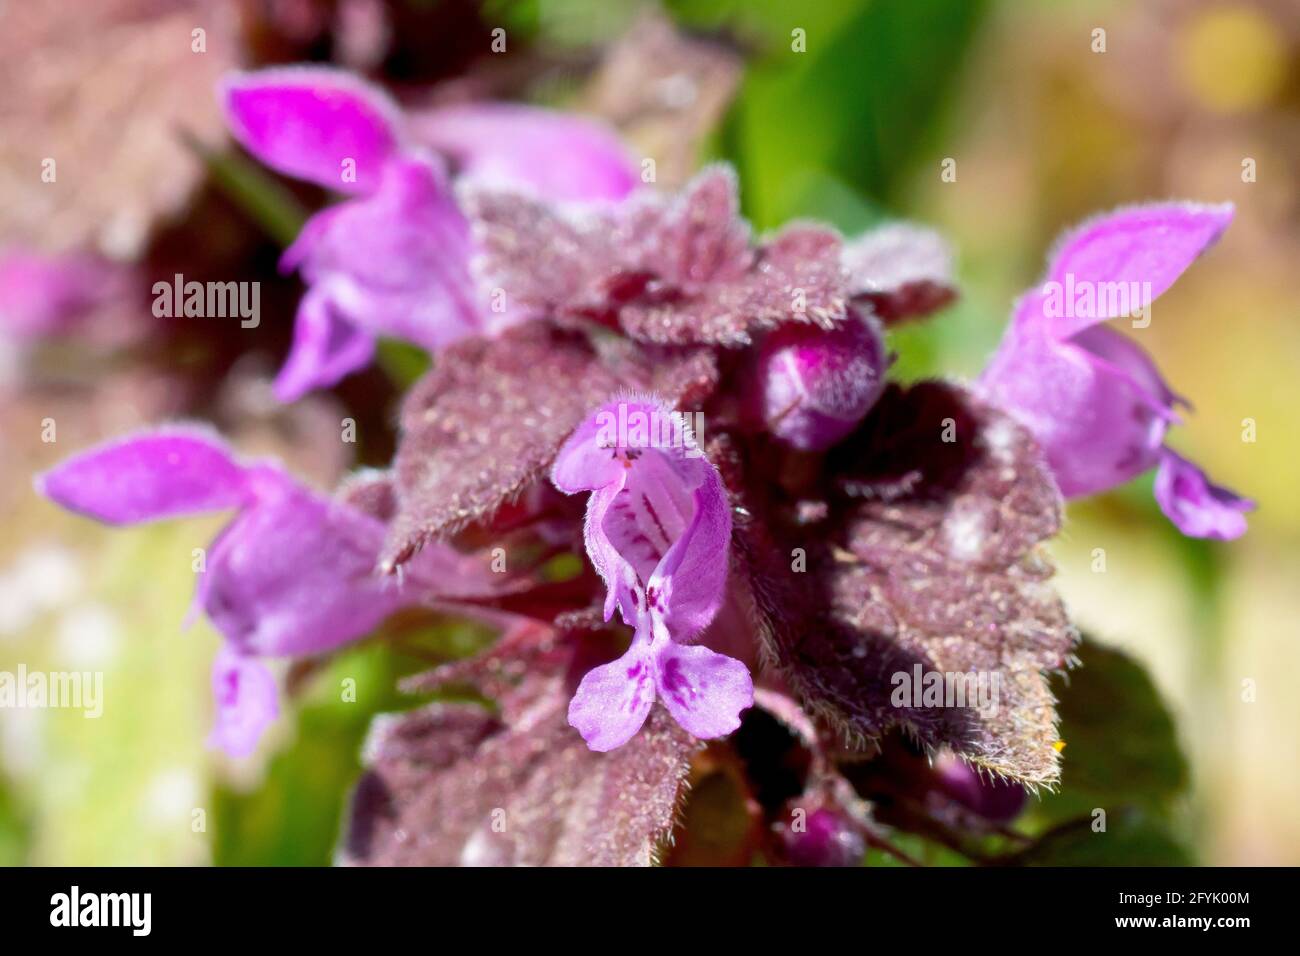 Red Deadnettle (lamium purpureum), close up of the top of the plant showing the flowers and the reddish, purplish leaves. Stock Photo